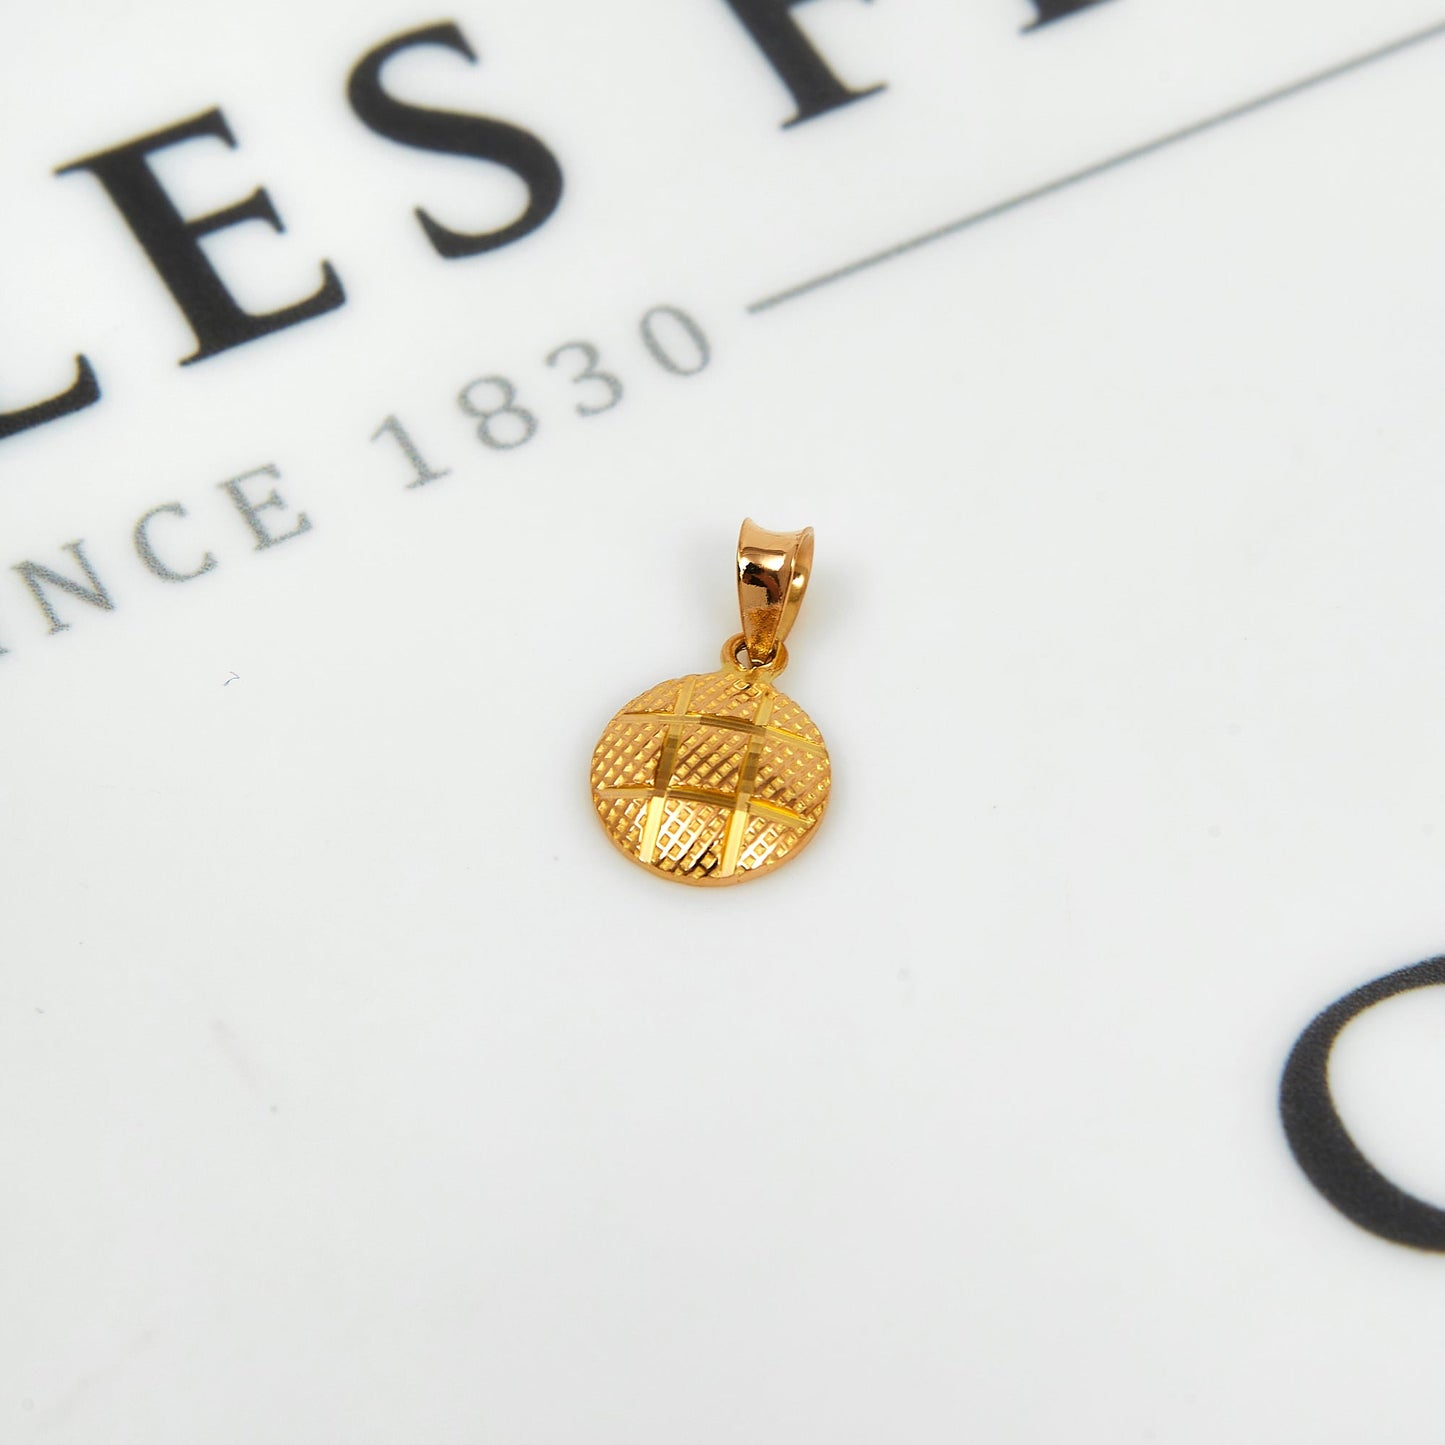 Pre-Owned 22ct Yellow Gold Diamond Cut Round Charm Pendant